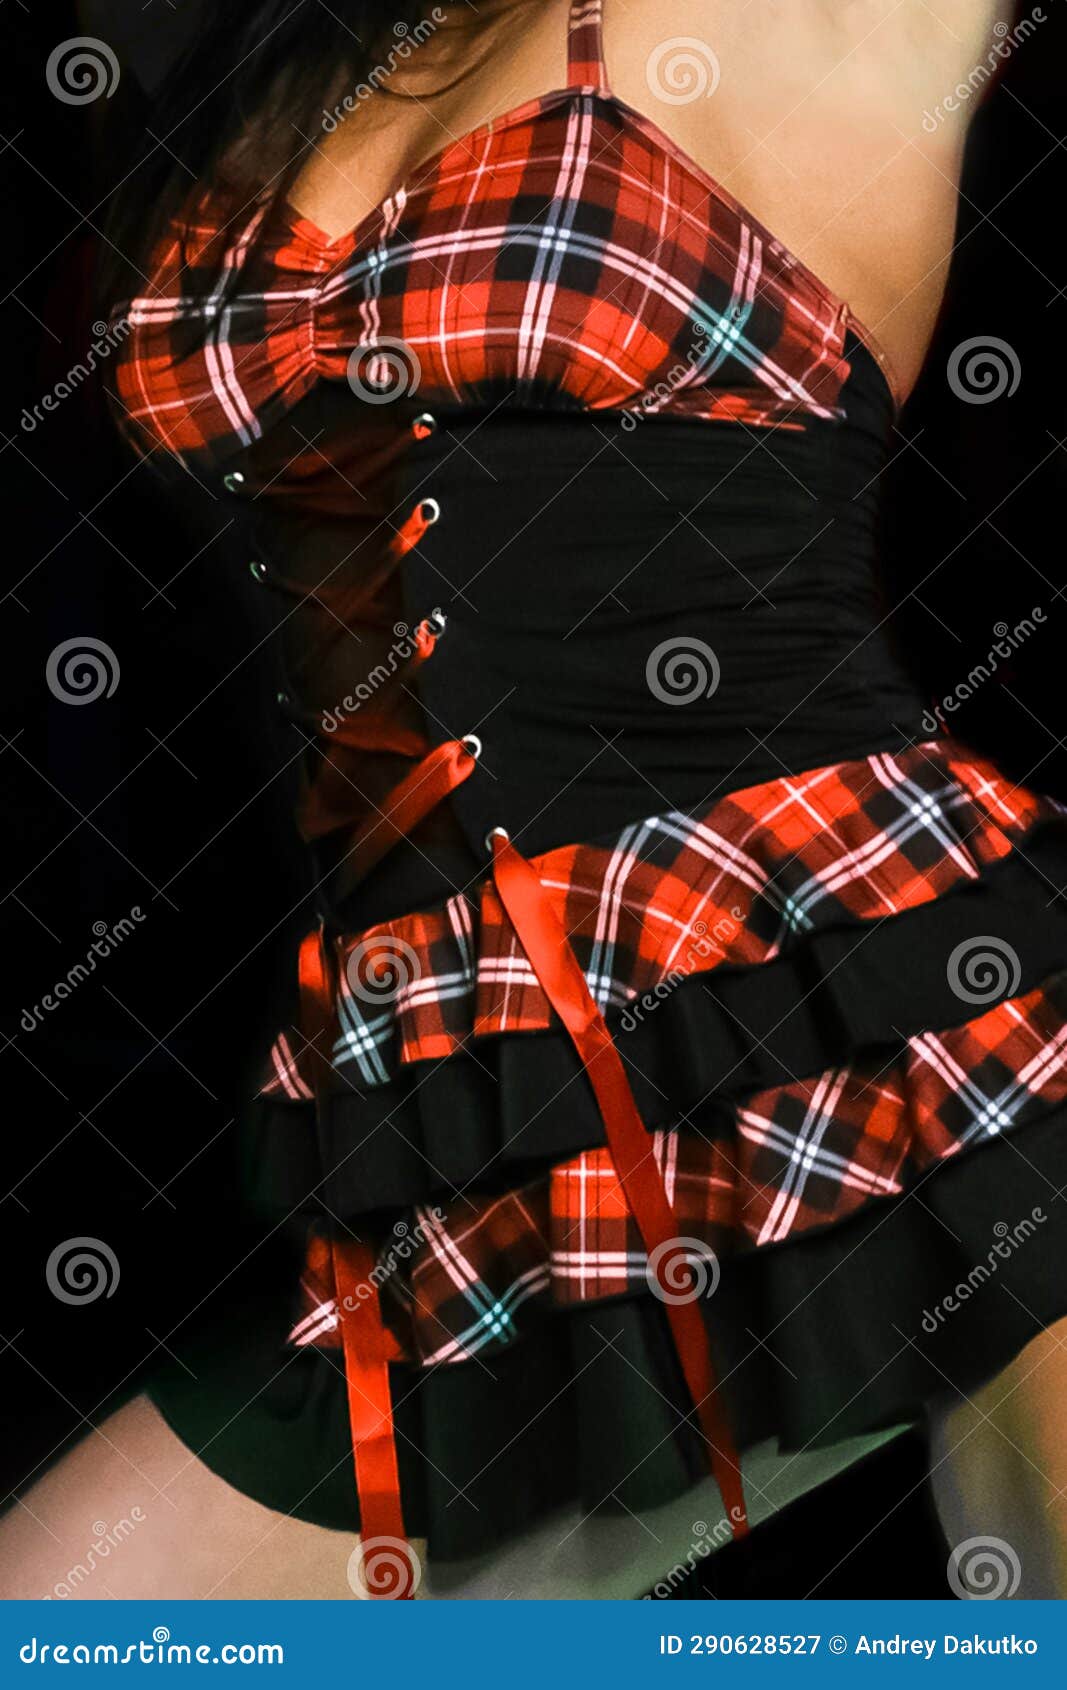 black dress on an adult woman with a pattern red check light erotica sample